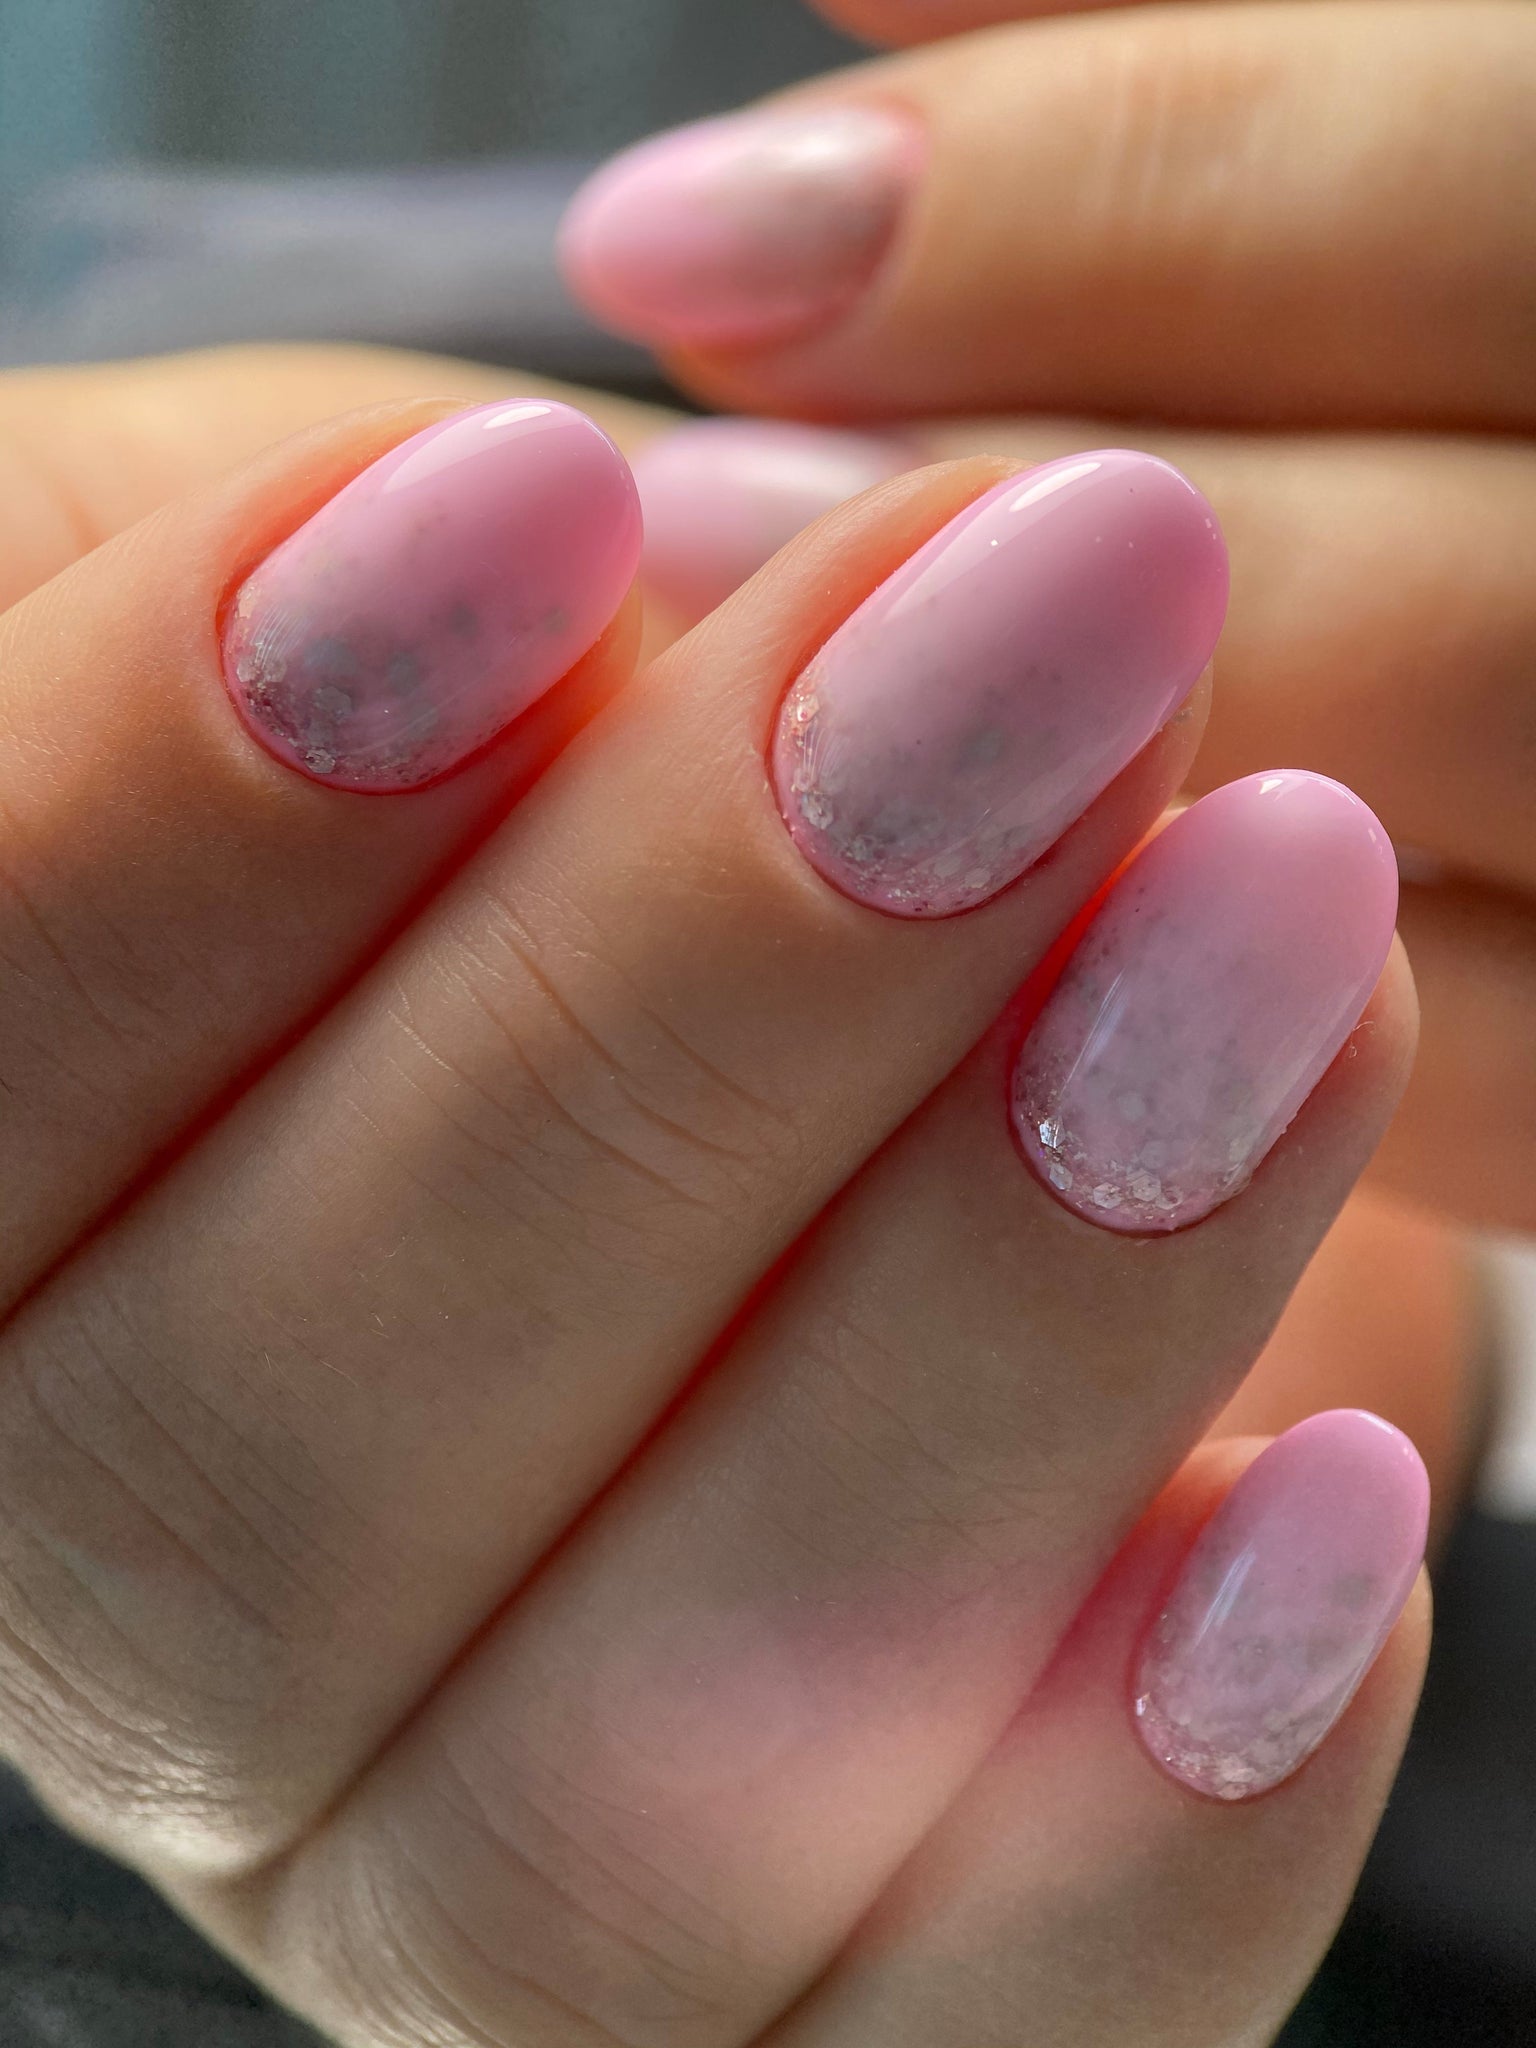 NAILCARE: CND™ SHELLAC™, Gelish and Manicure/Pedicure Aftercare in London -  Nails by Mets